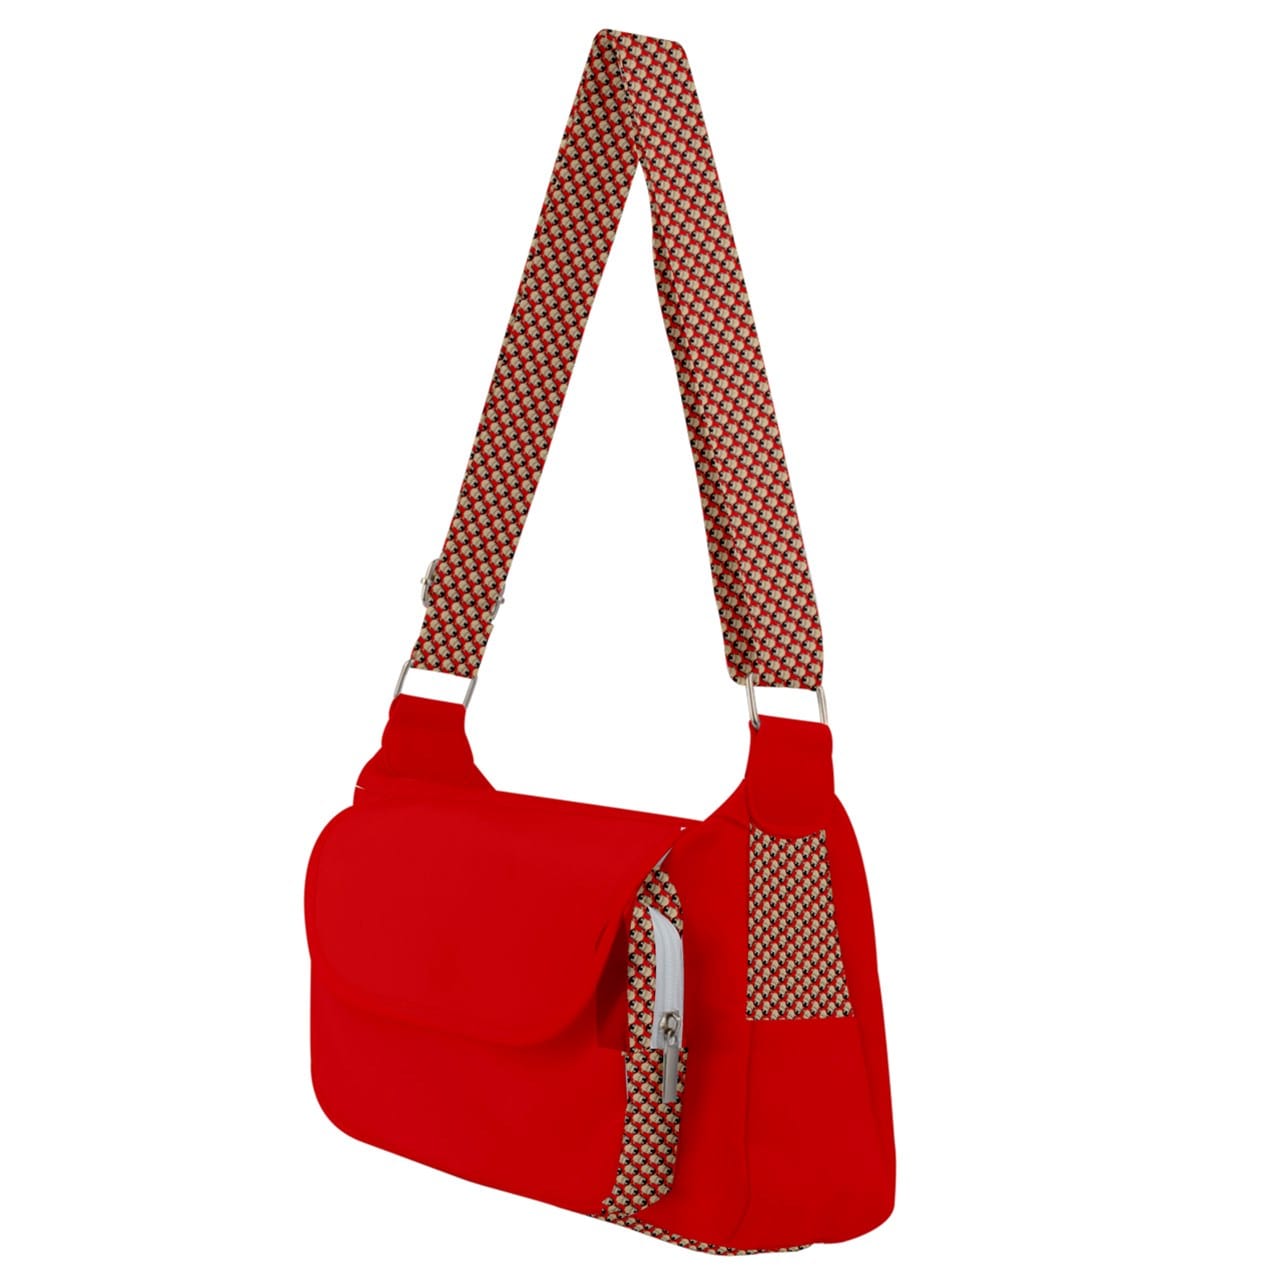 Wheaten Puppy Multipack Bag - red